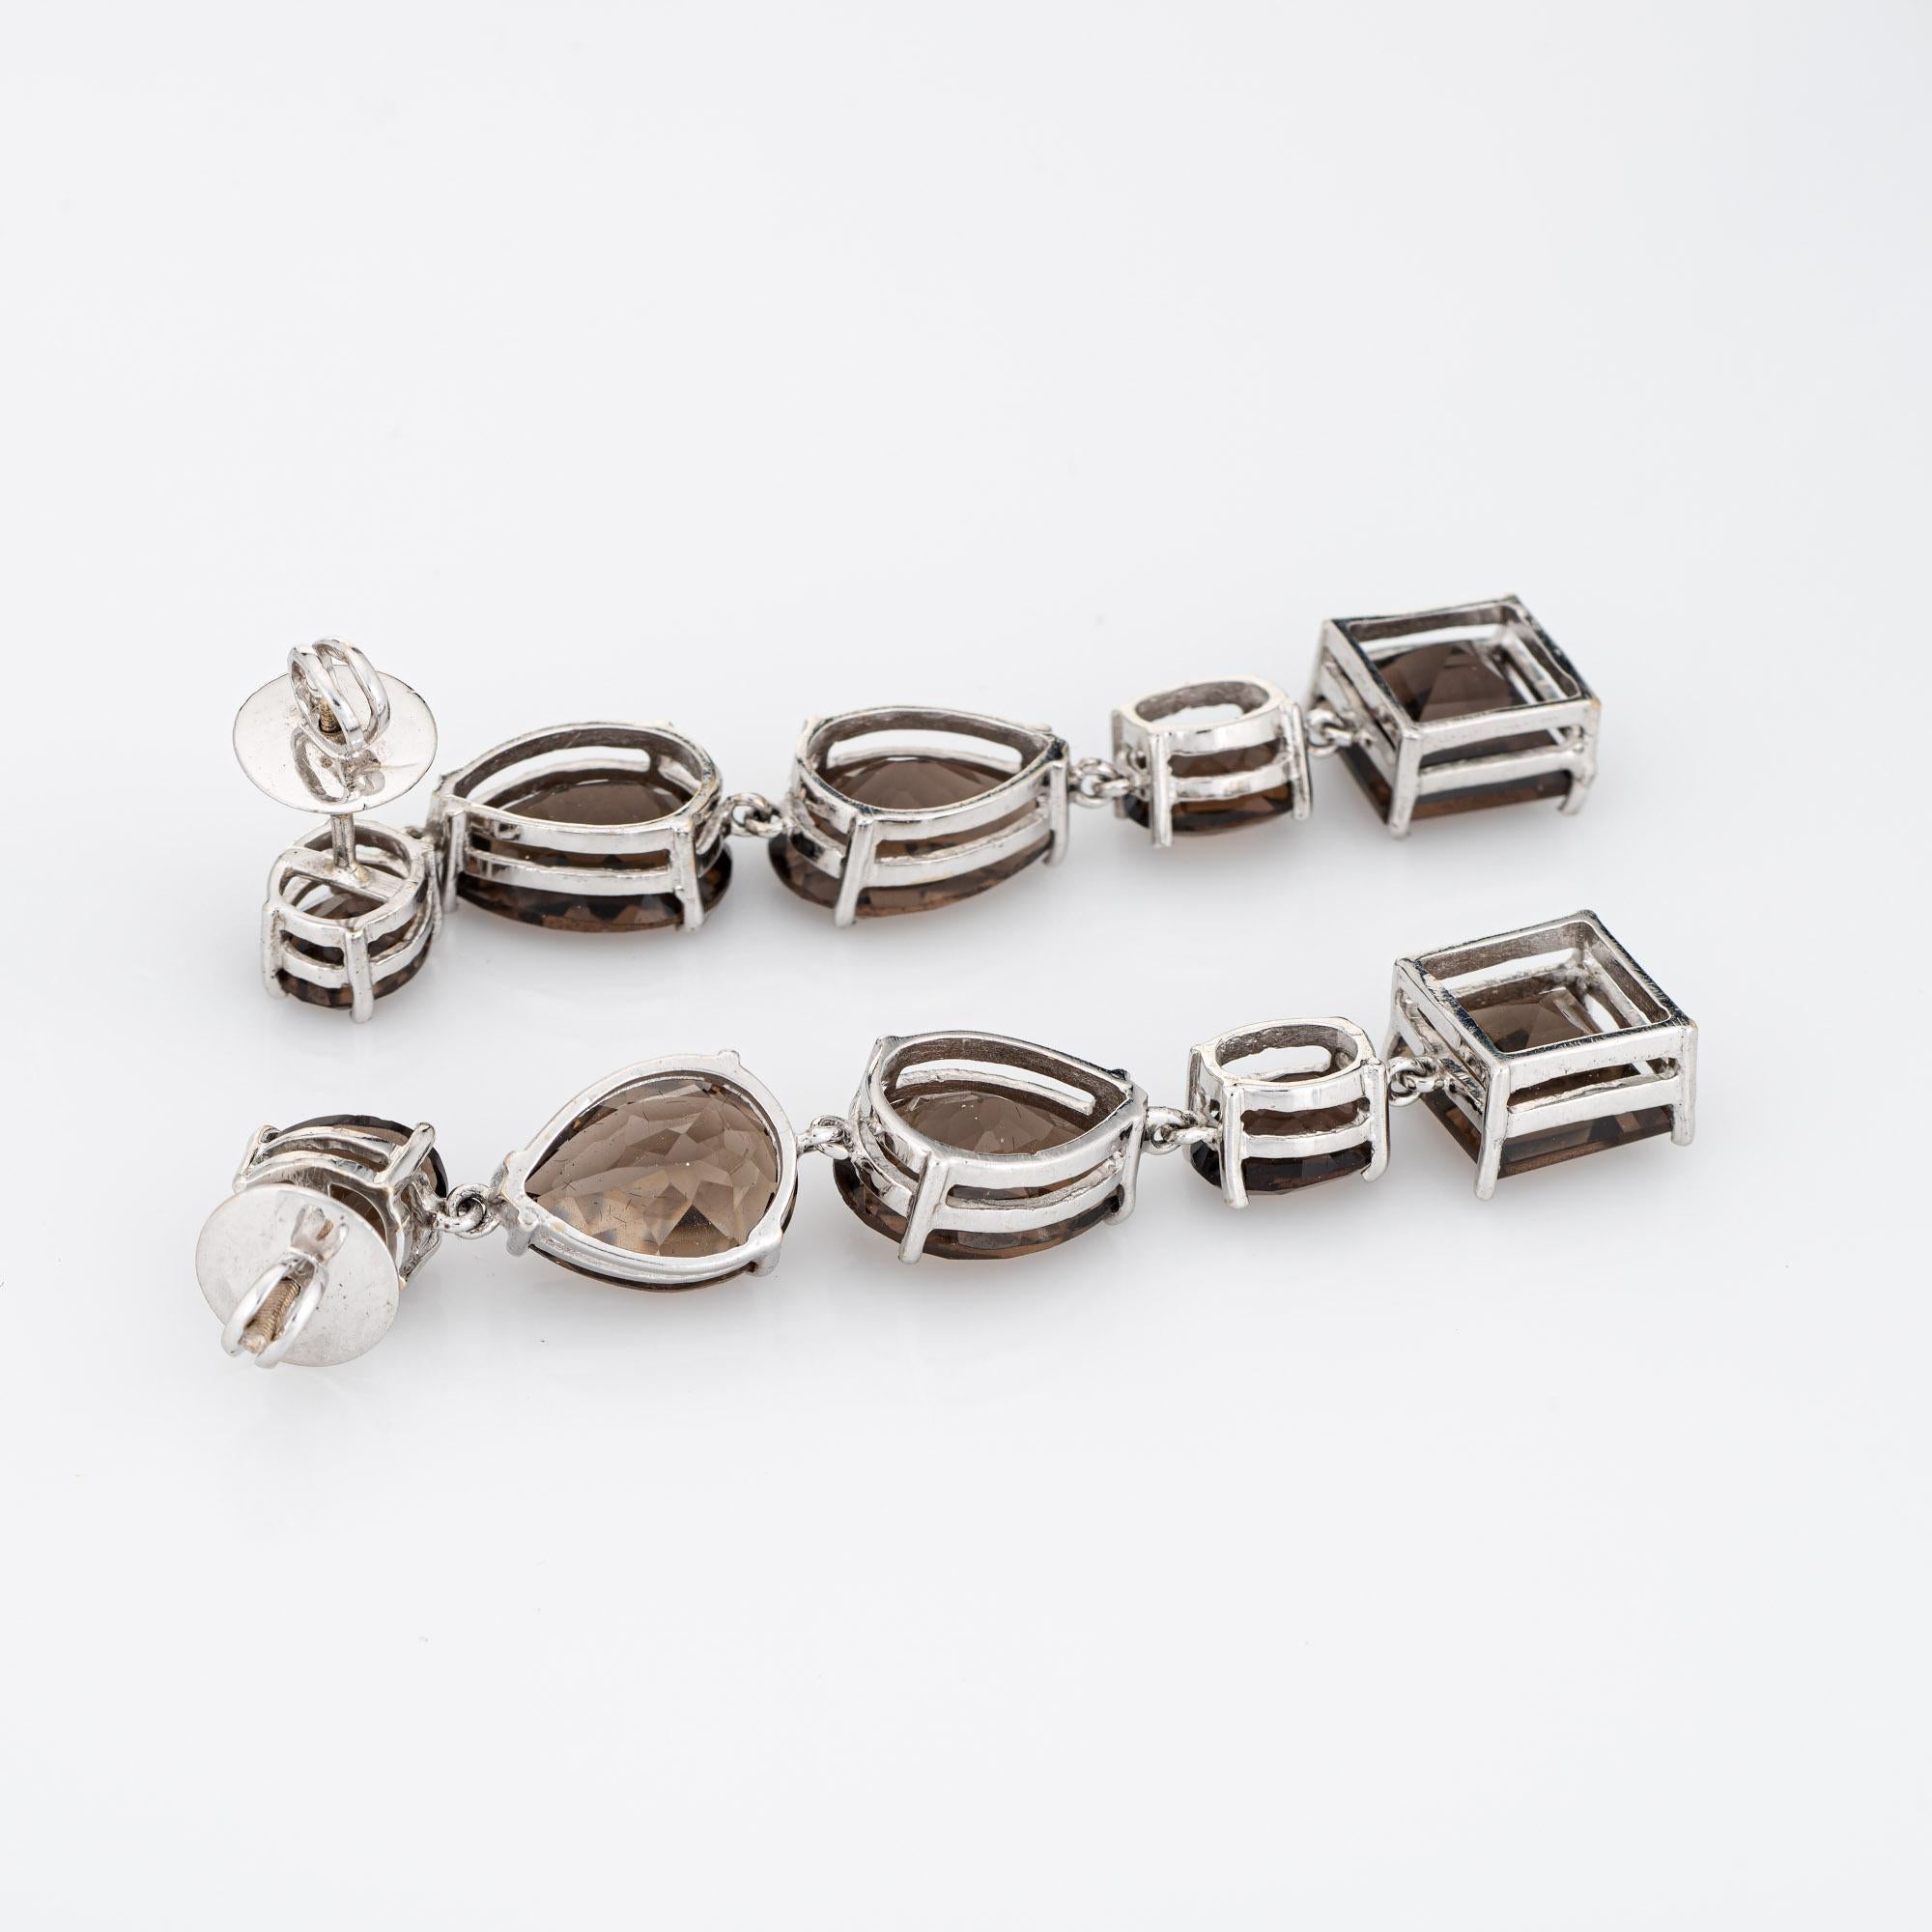 Finely detailed pair of estate mixed cut smoky topaz drop earrings crafted in 14k white gold. 

Smoky quartz in various shapes total an estimated 14 carats (in very good condition and free of cracks or chips).   

The earrings make a great statement